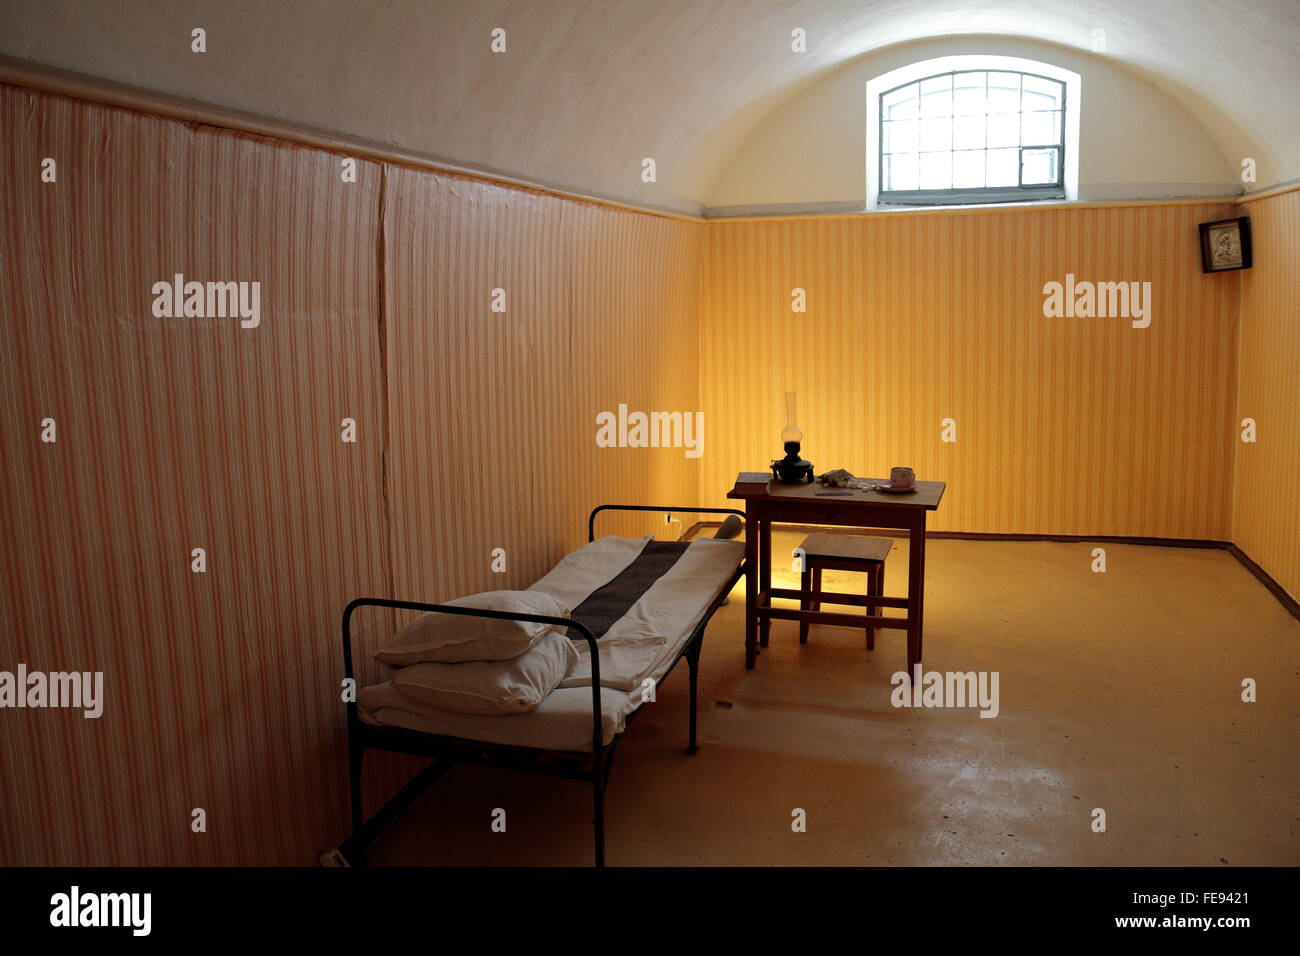 A Prison cell in 1870's style in the Trubetskoy Bastion Prison, Peter and Paul Fortress in St Petersburg, Russia. Stock Photo